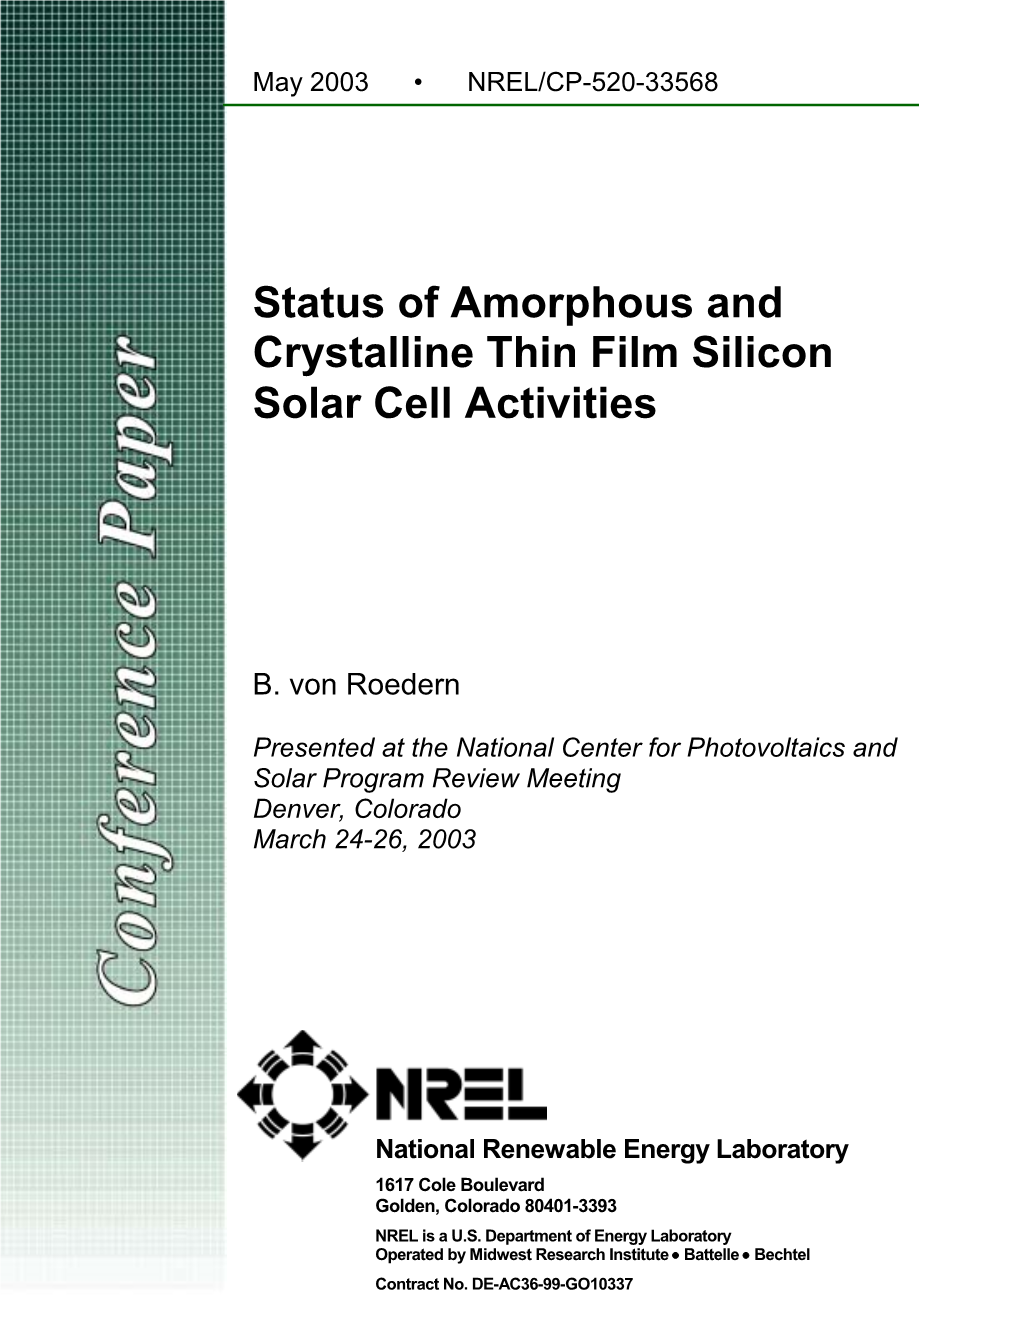 Status of Amorphous and Crystalline Thin Film Silicon Solar Cell Activities